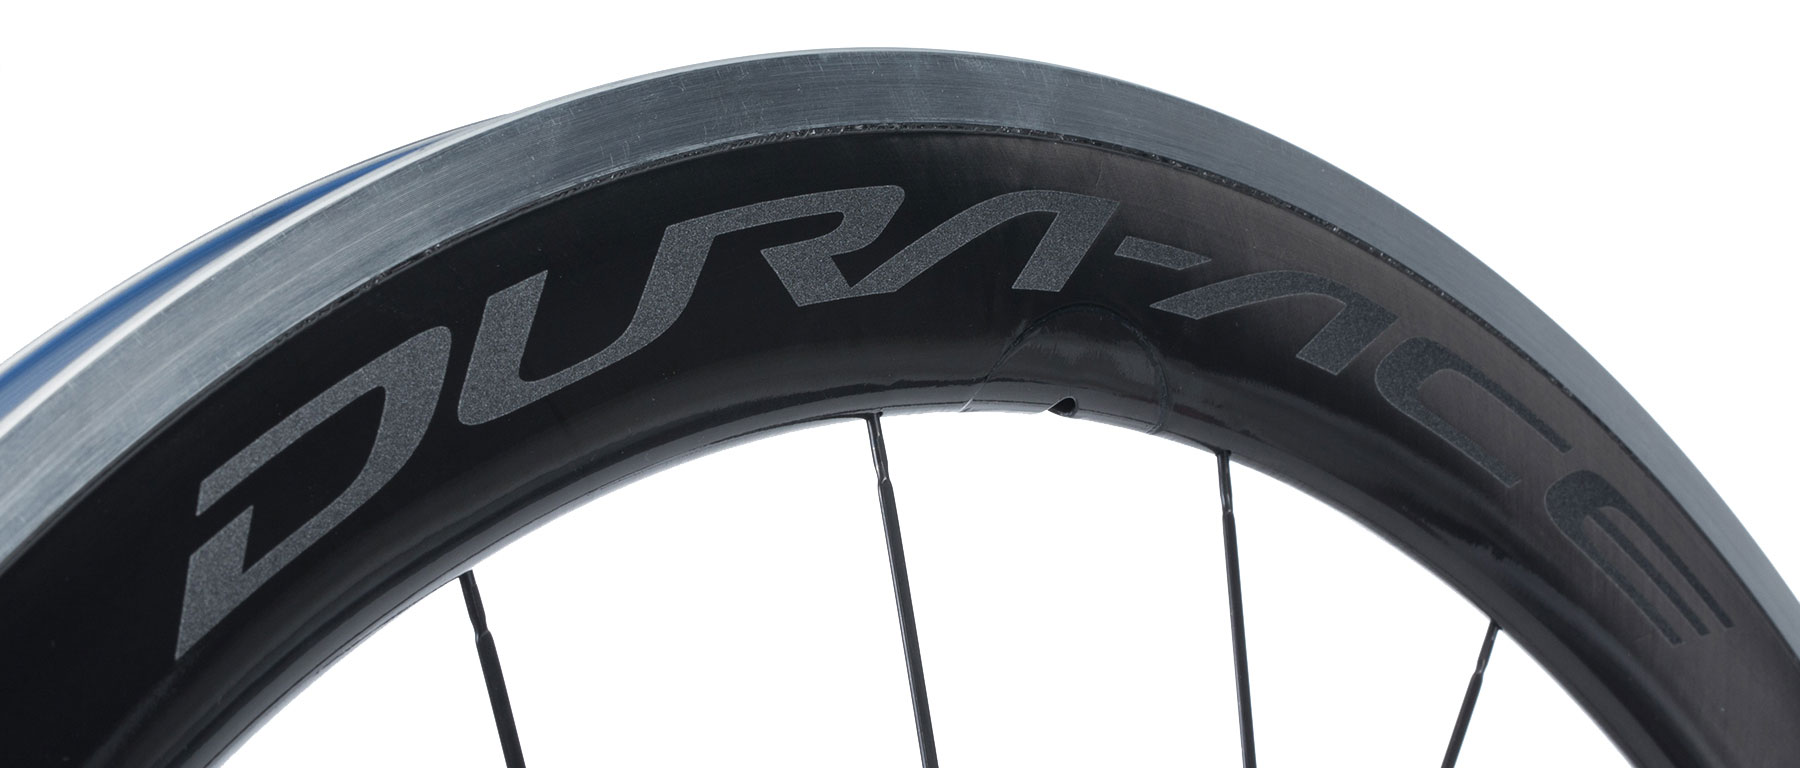 Shimano Dura-Ace WH-R9100 C60-CL Wheelset